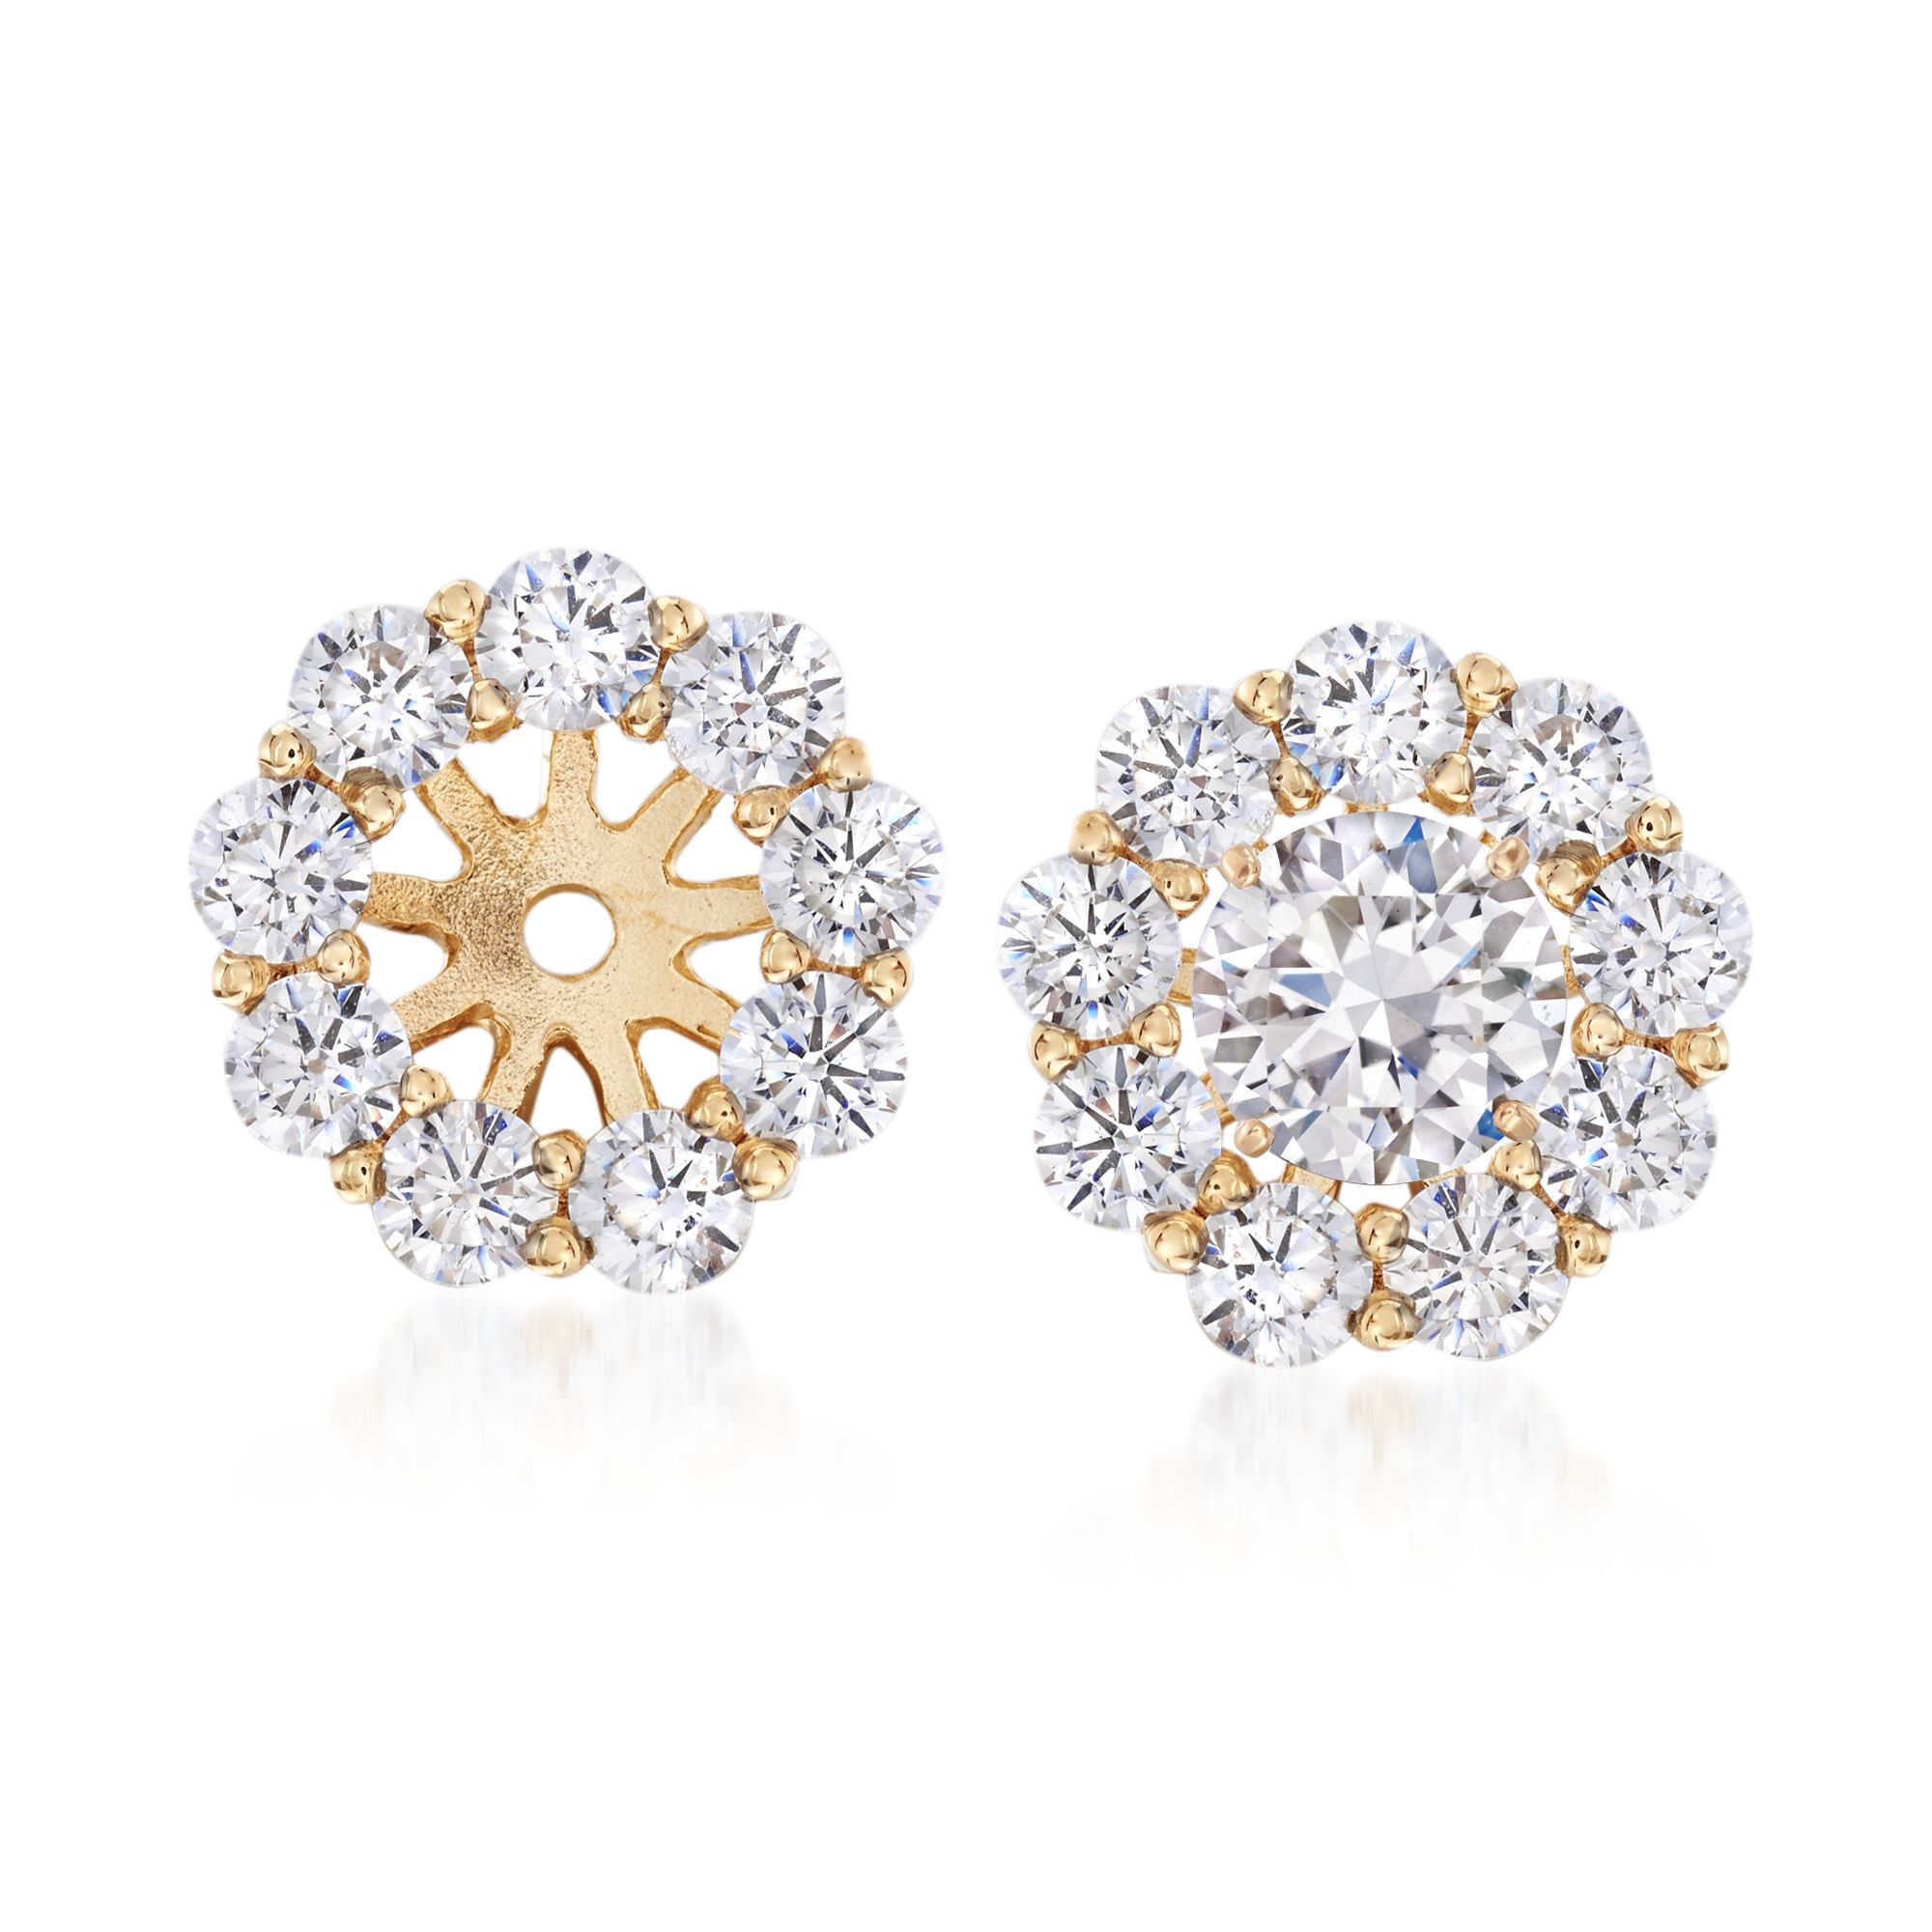 1.00 ct. t.w. CZ Earring Jackets in 14kt Yellow Gold | Ross-Simons